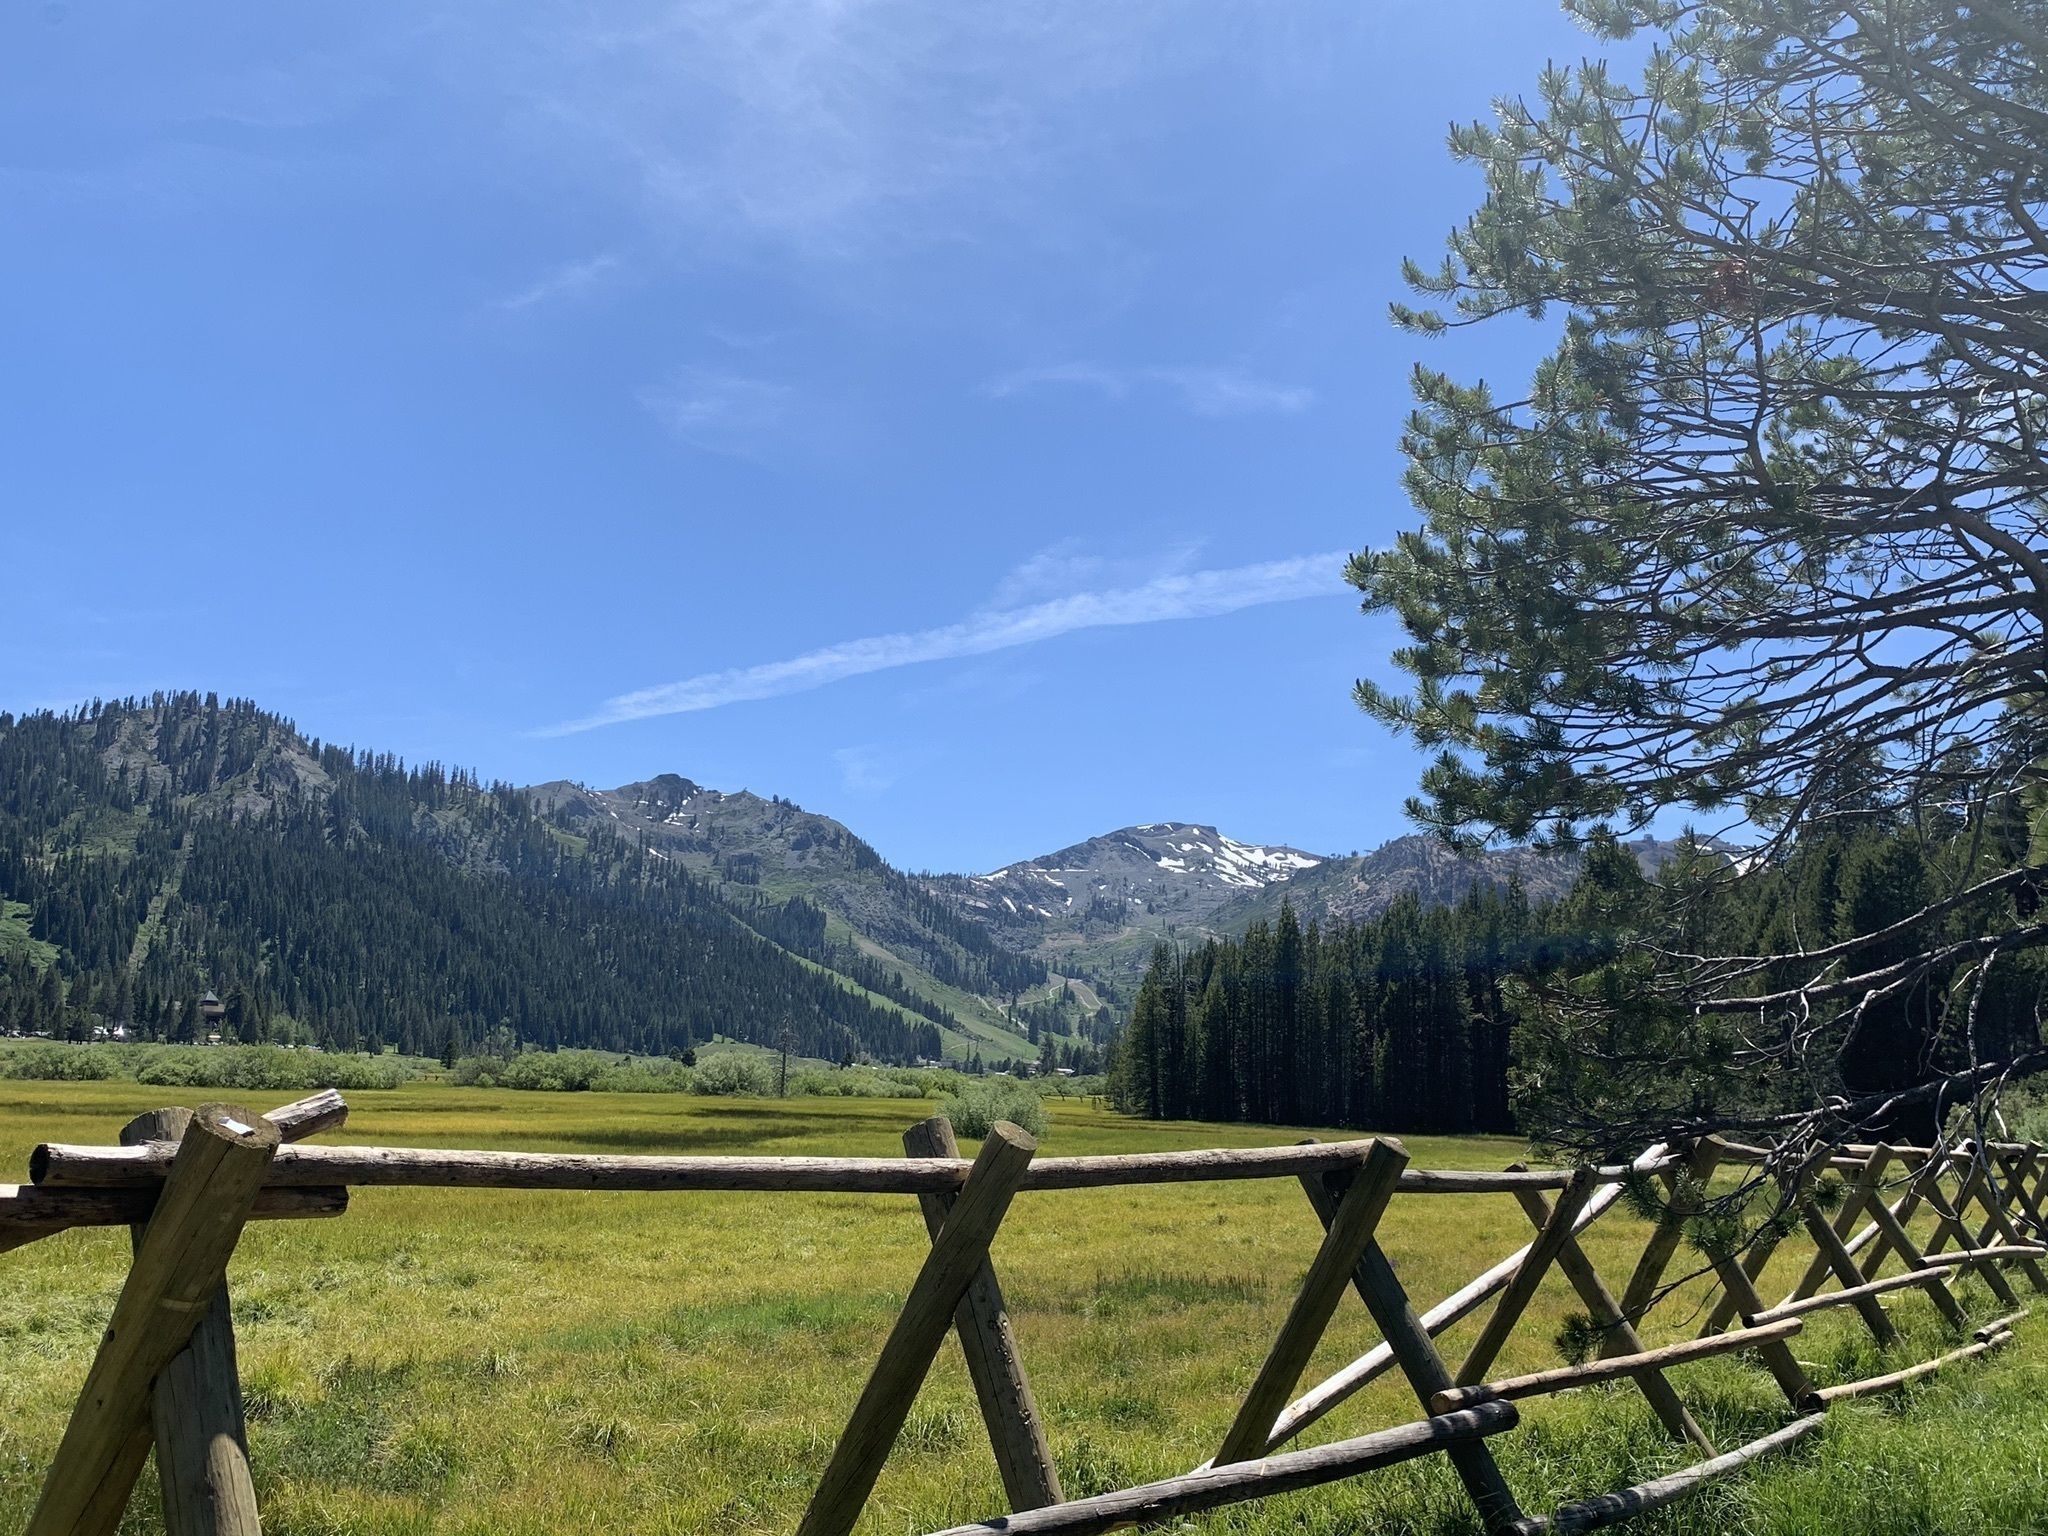 The Squaw Valley Trail